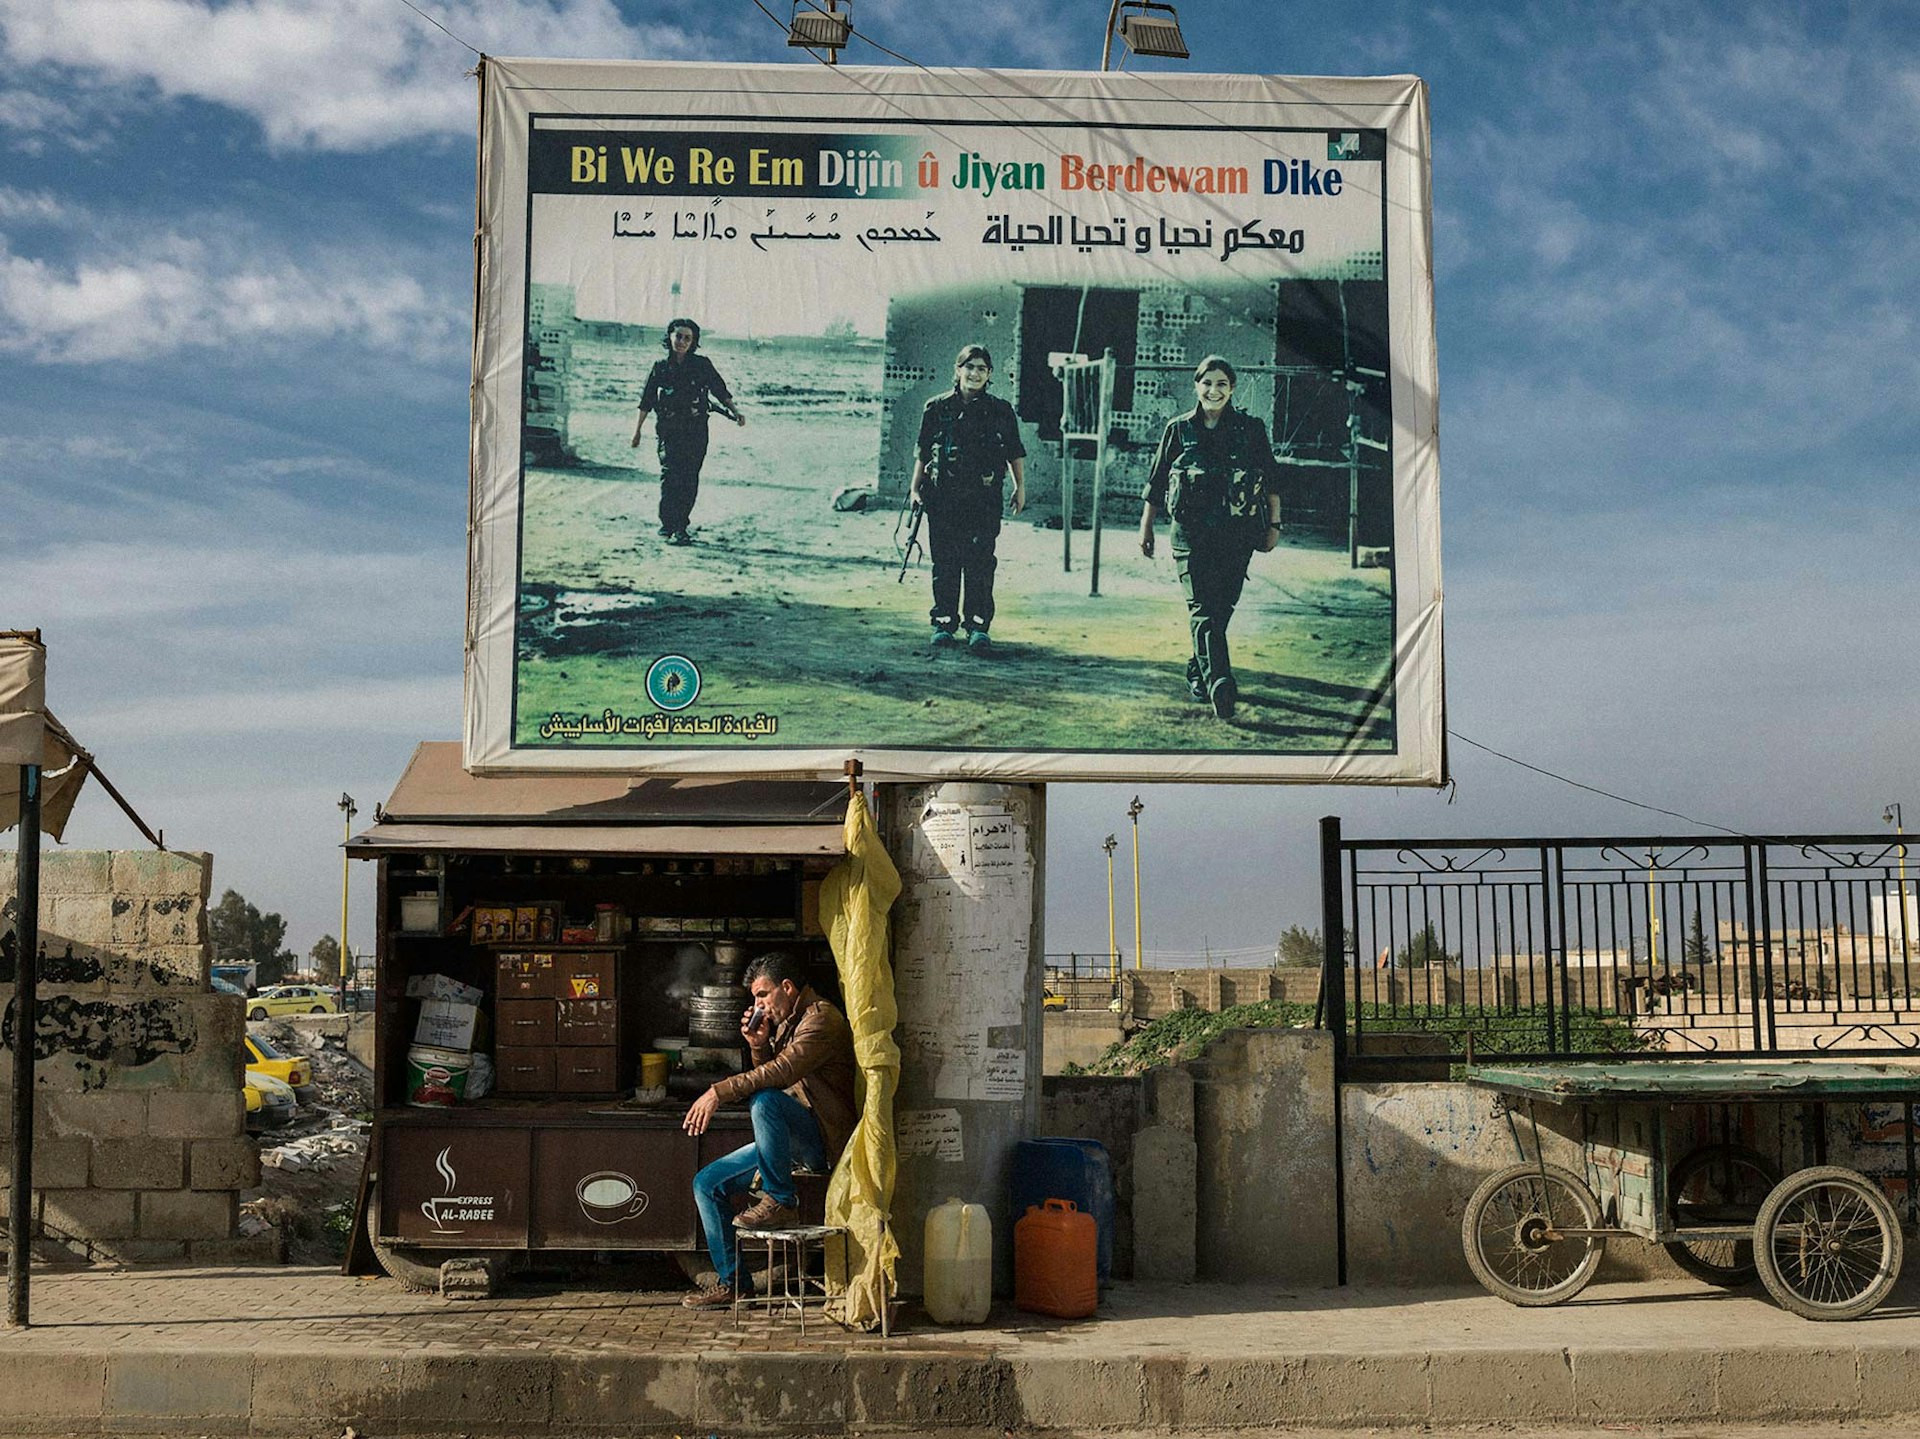 Billboards in Qamishlou. Rojava, of martyrs who died fighting ISIS: "with you we live on and life continues". © Newsha Tavakolian / Magnum Photos